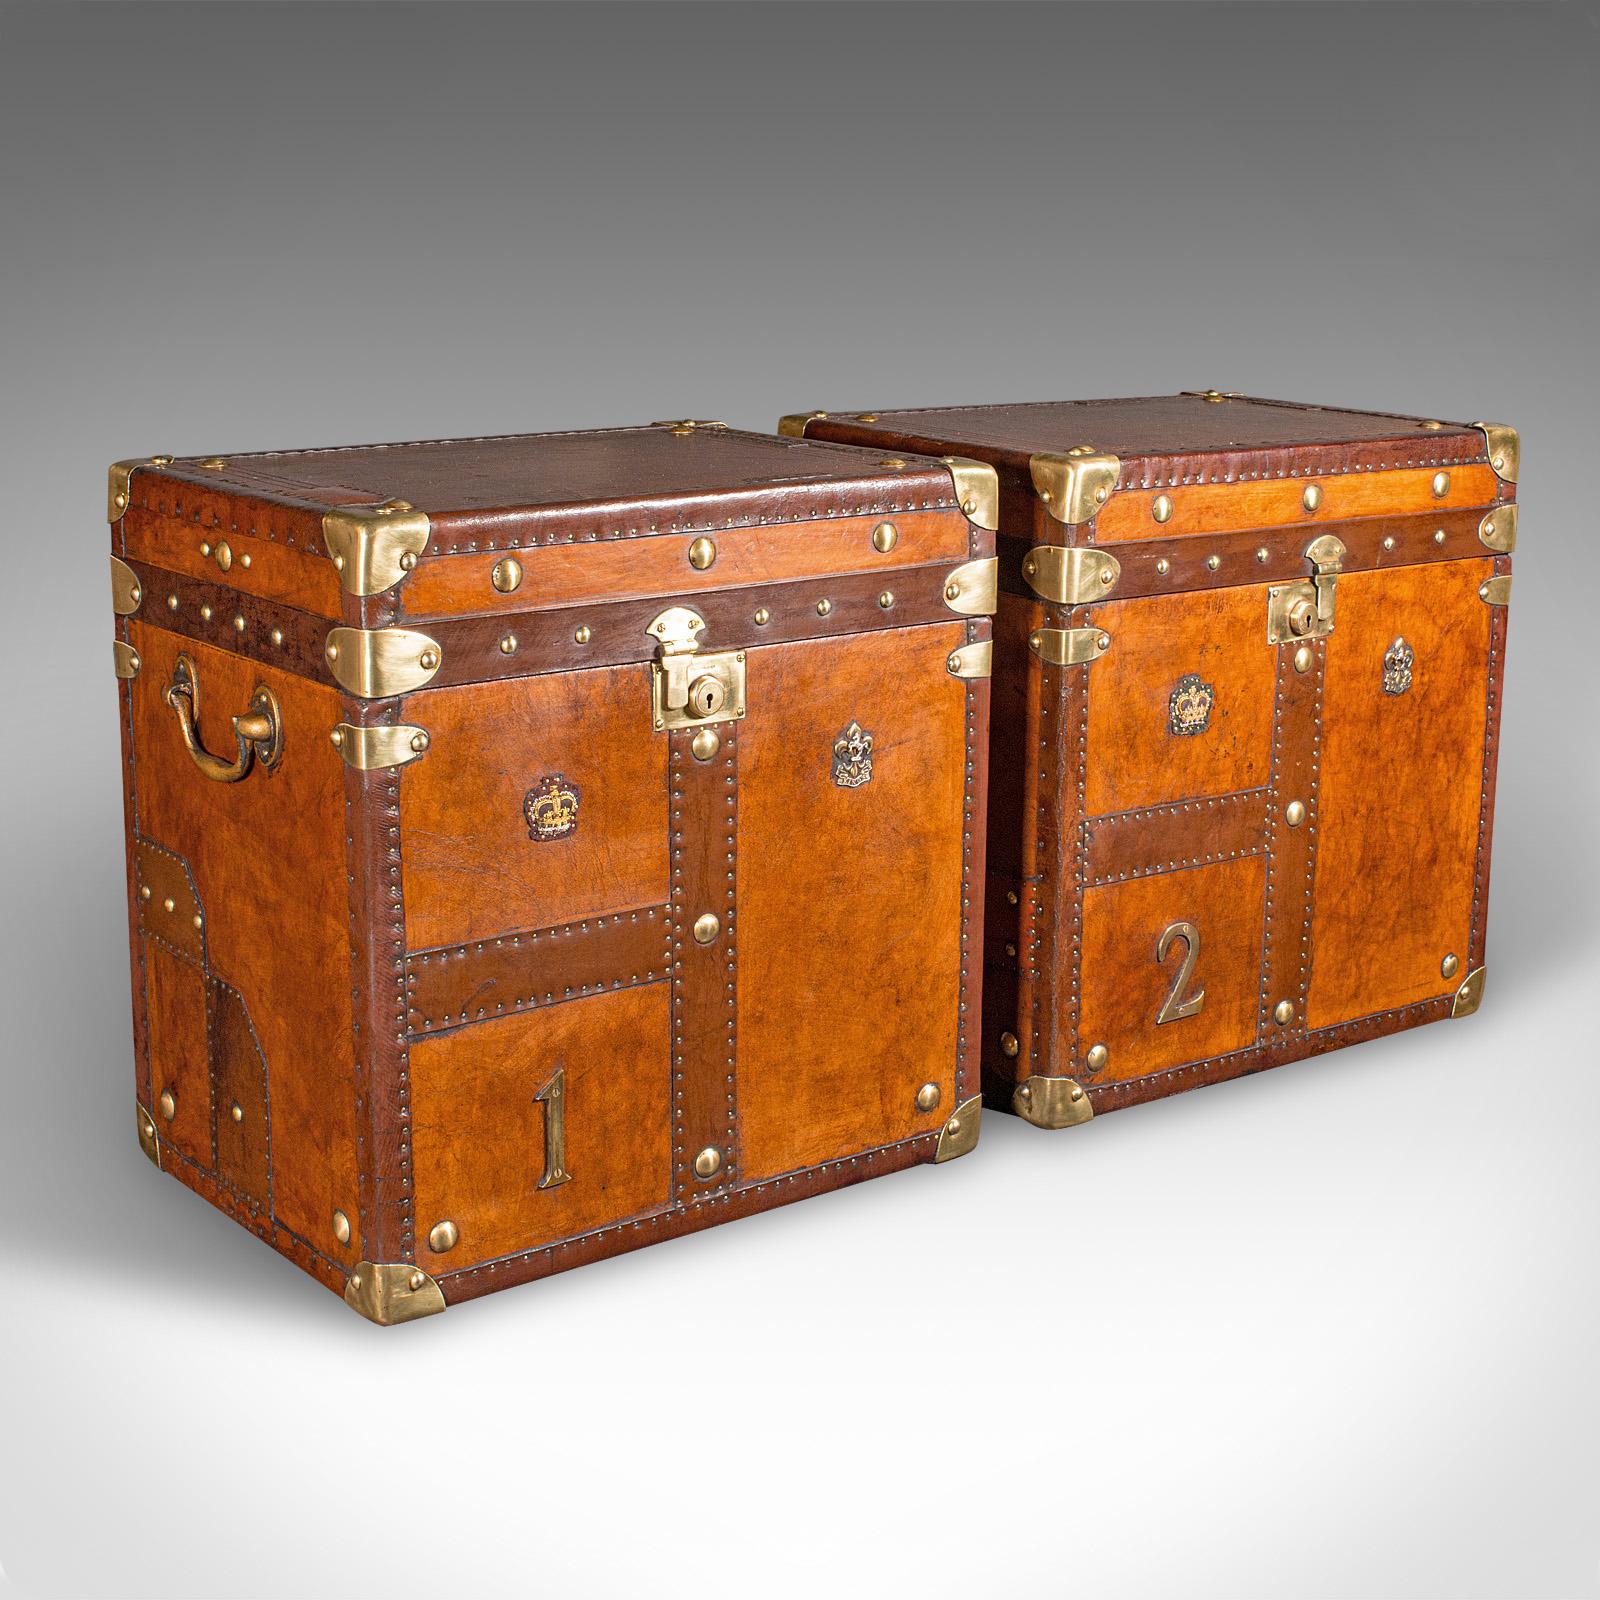 This is a pair of vintage officer's campaign luggage cases. An English, leather and brass bedside nightstand, dating to the late 20th century, circa 1980.

Exquisite casework, with beautifully appointed detail and finishes
Displaying a desirable